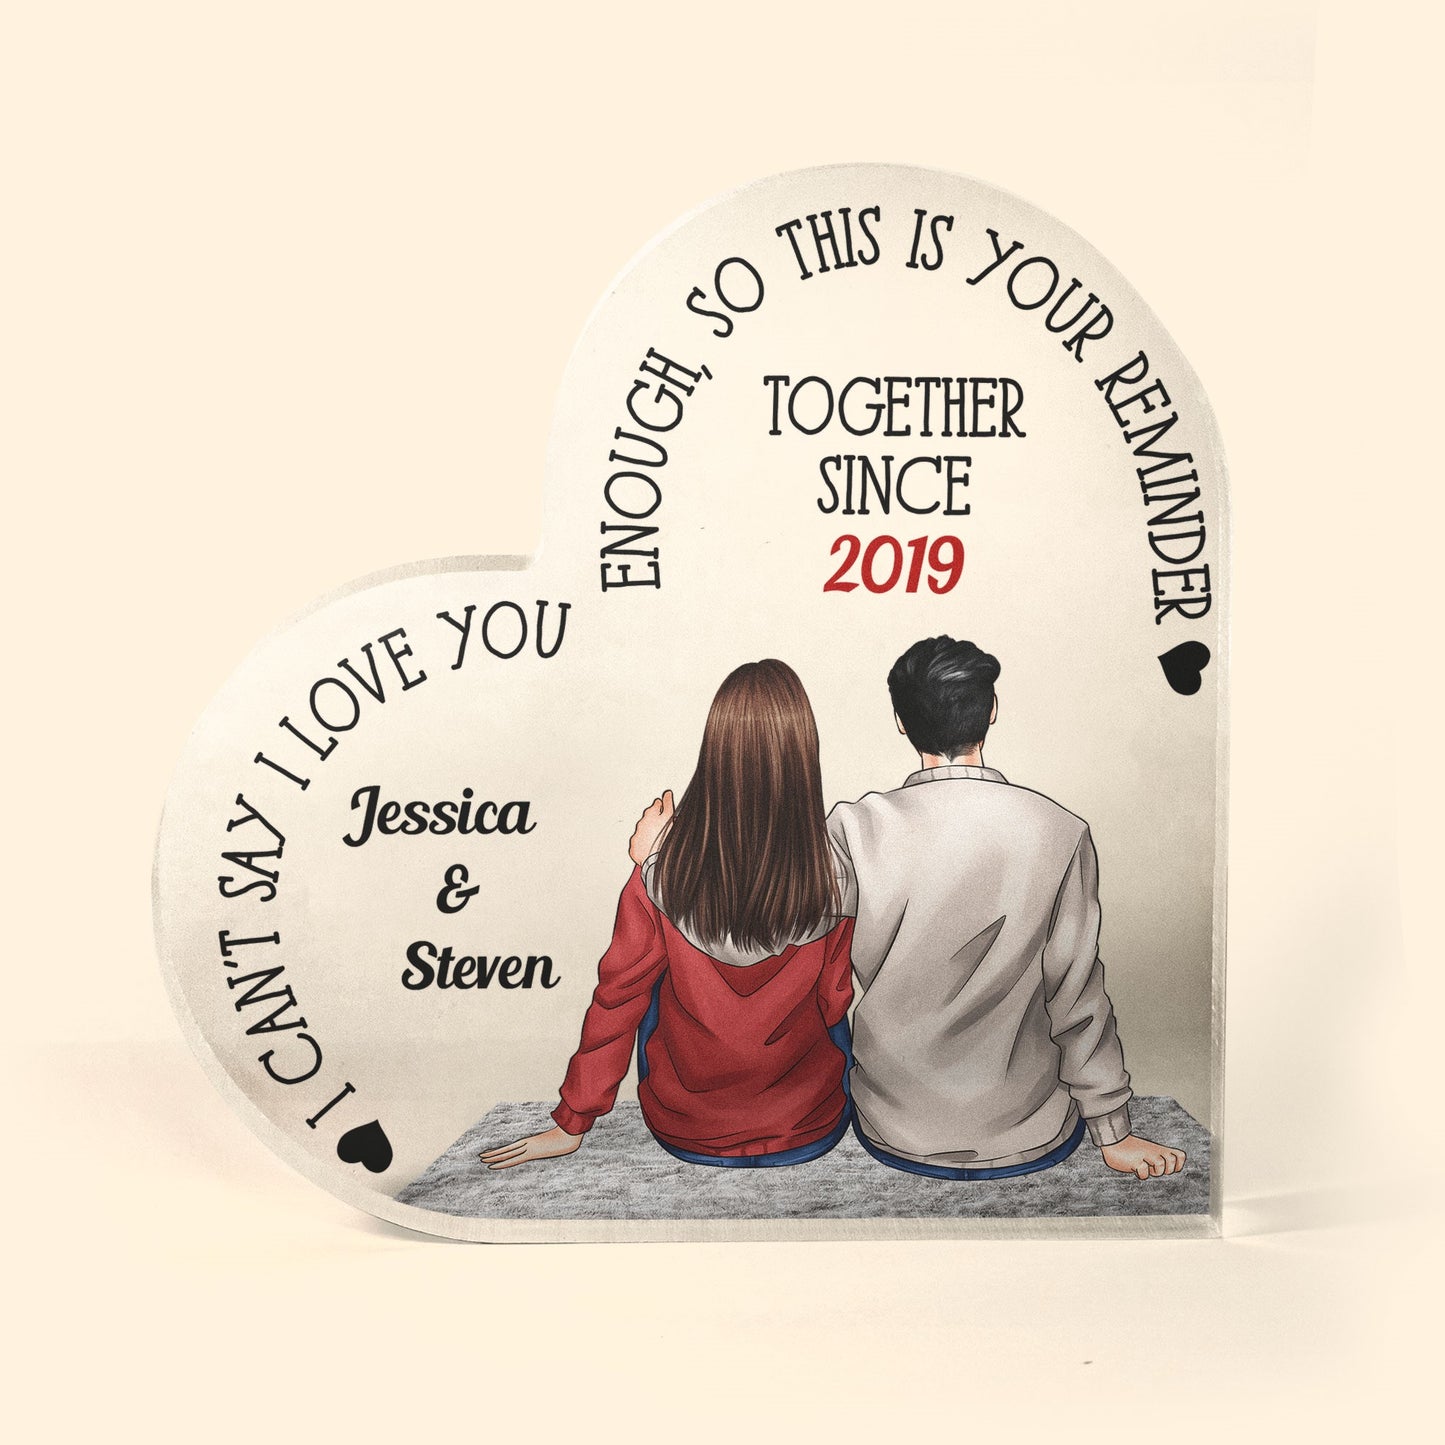 I Can't Say I Love You Enough, So This Is Your Reminder - Personalized Heart Shaped Acrylic Plaque - Birthday, Loving, Valentine Gift For Couple, Boyfriend, Girlfriend, Husband, Wife